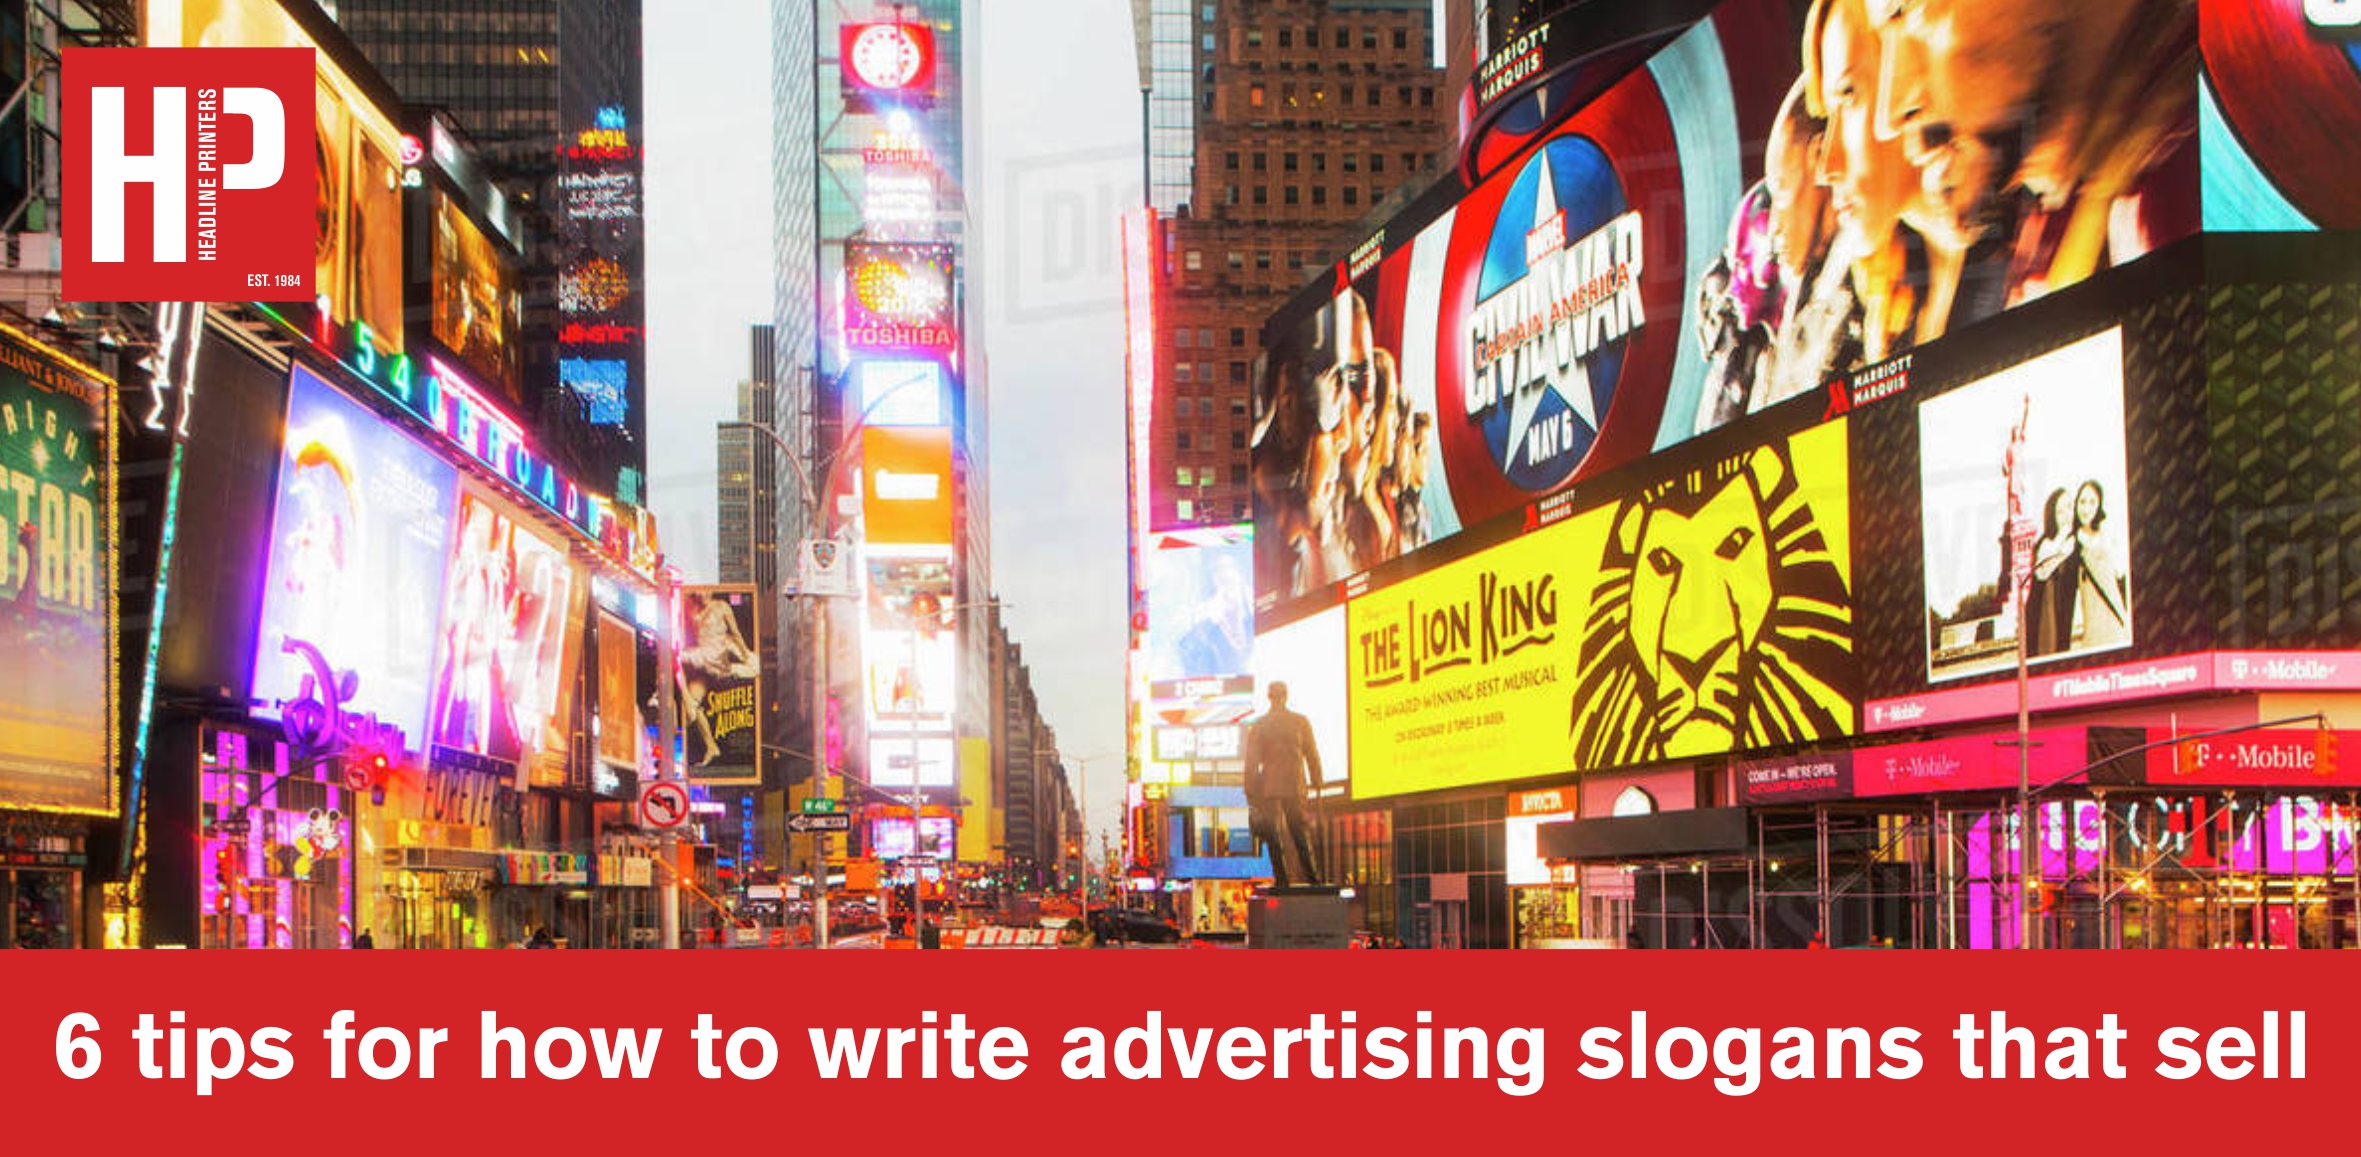 6 tips for how to write advertising slogans that sell